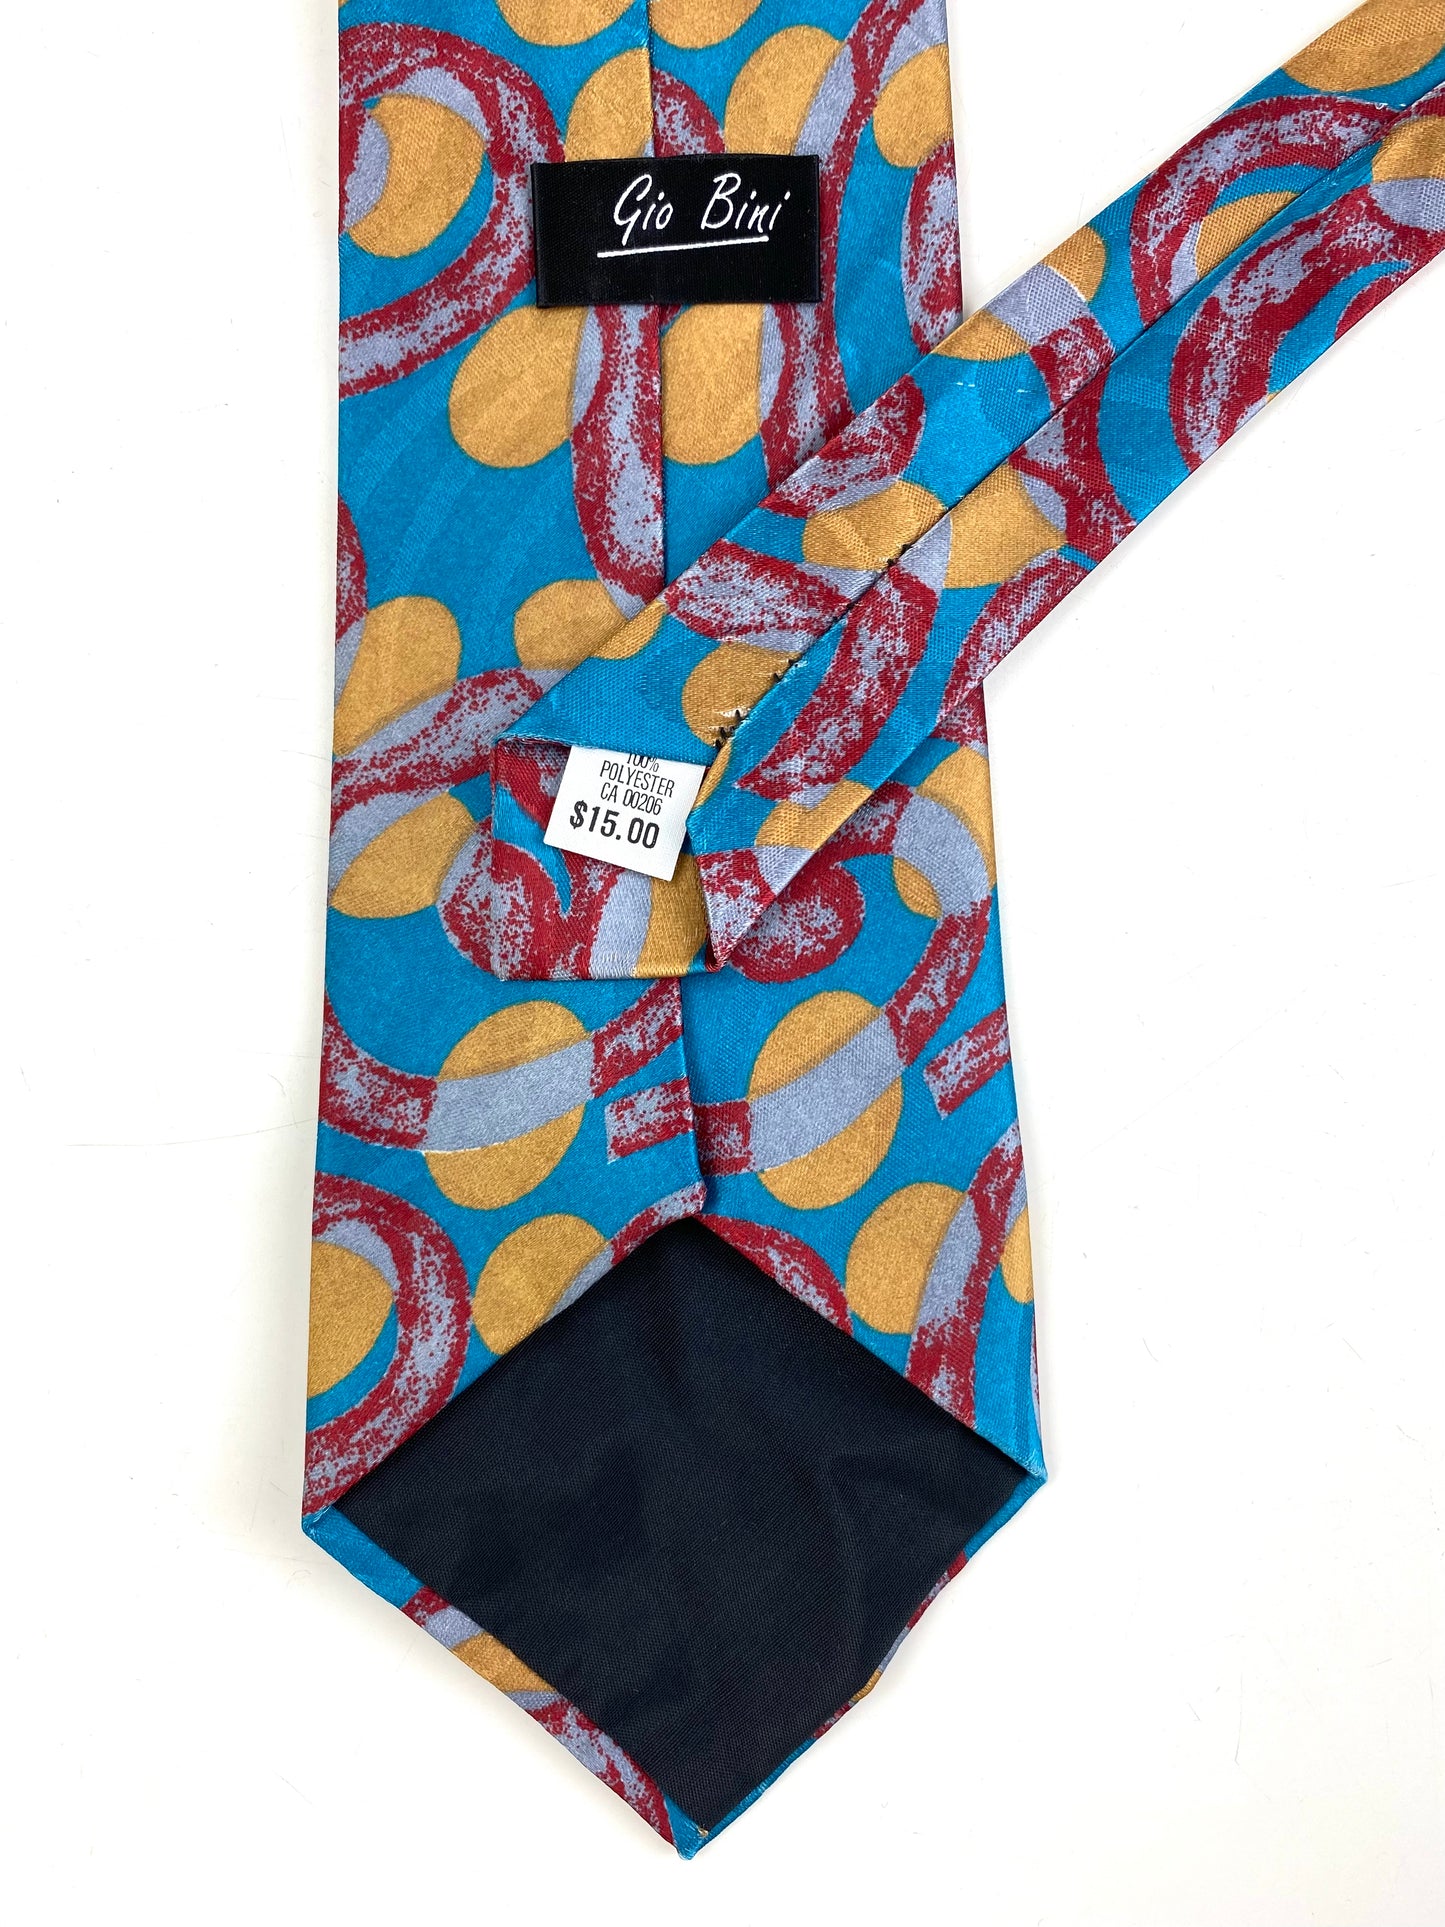 Back and labels of: 90s Deadstock Necktie, Men's Vintage Teal/ Red/ Yellow Swirl Dot Pattern Tie, NOS